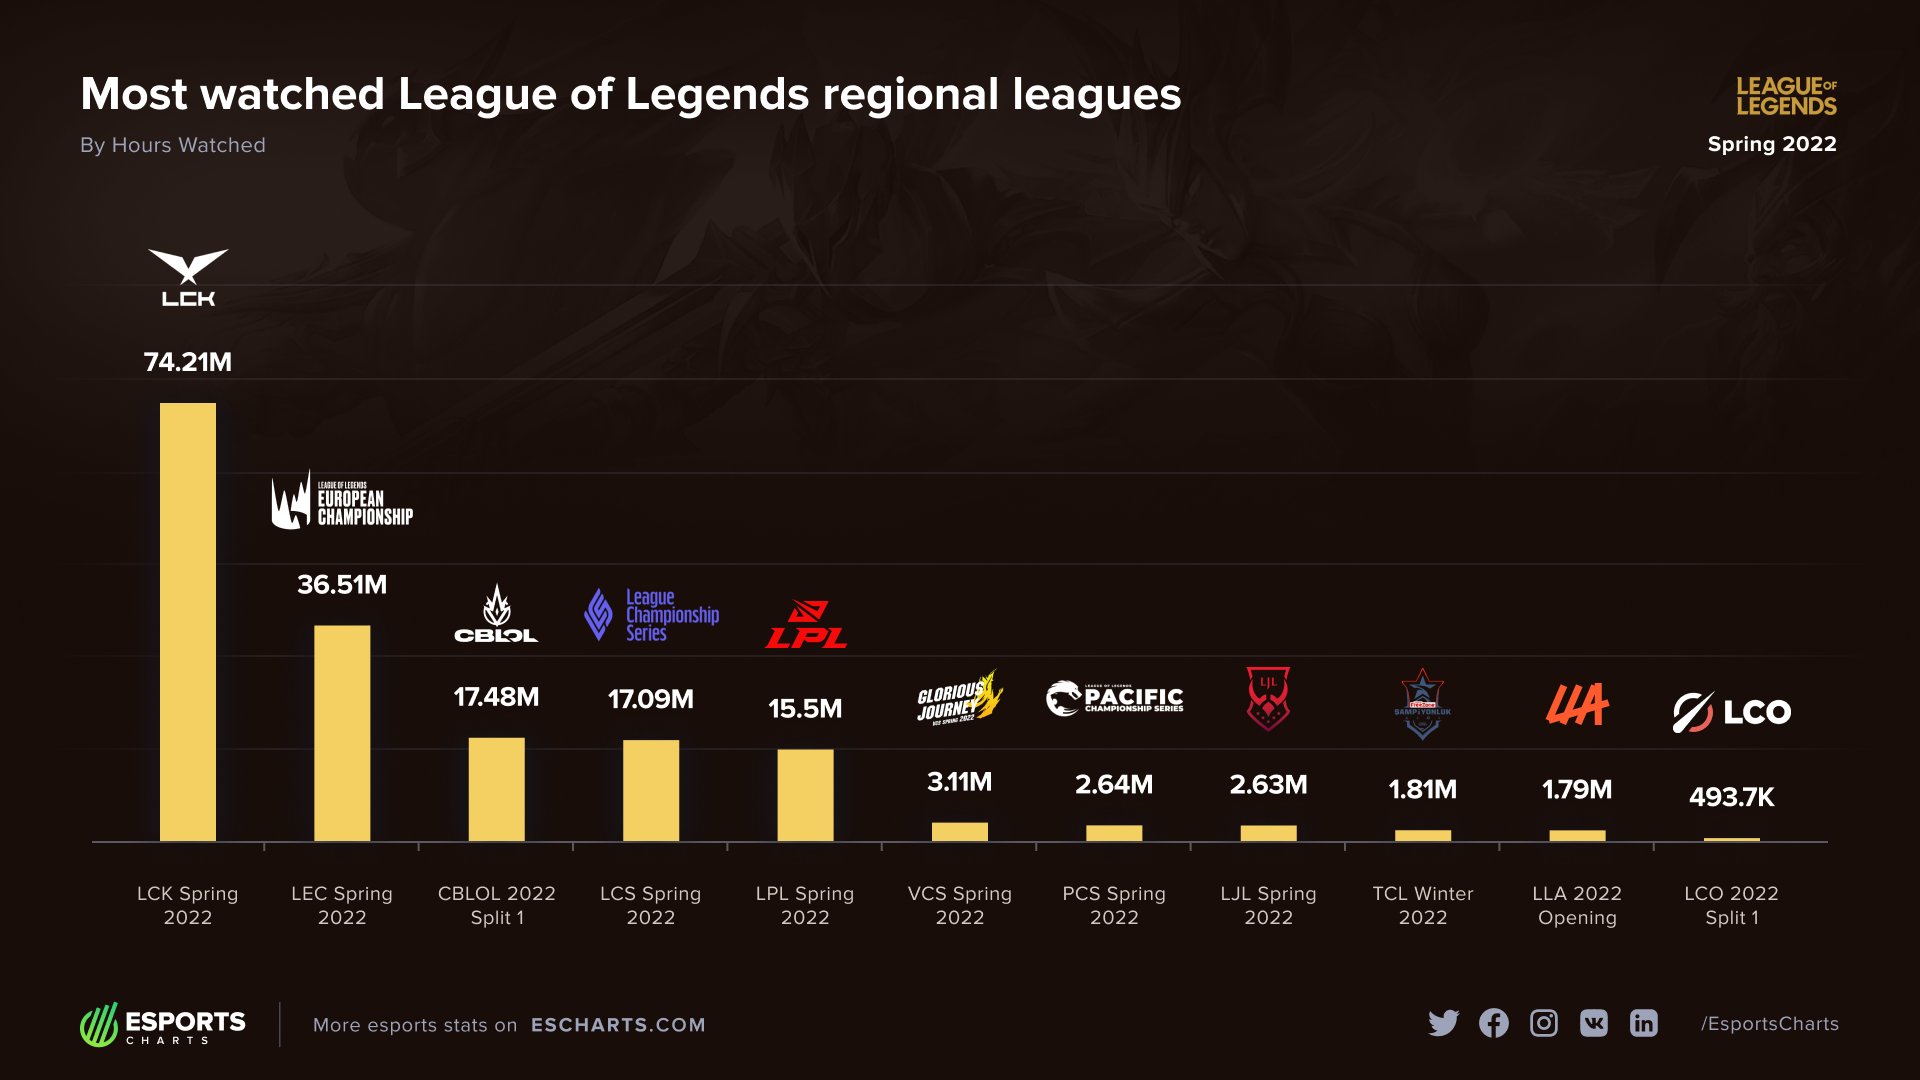 Most watched esports game in 2022 became League Of Legends with more than  615M Hours Watched. 🔥 #esportsresults2022 : r/lolesports